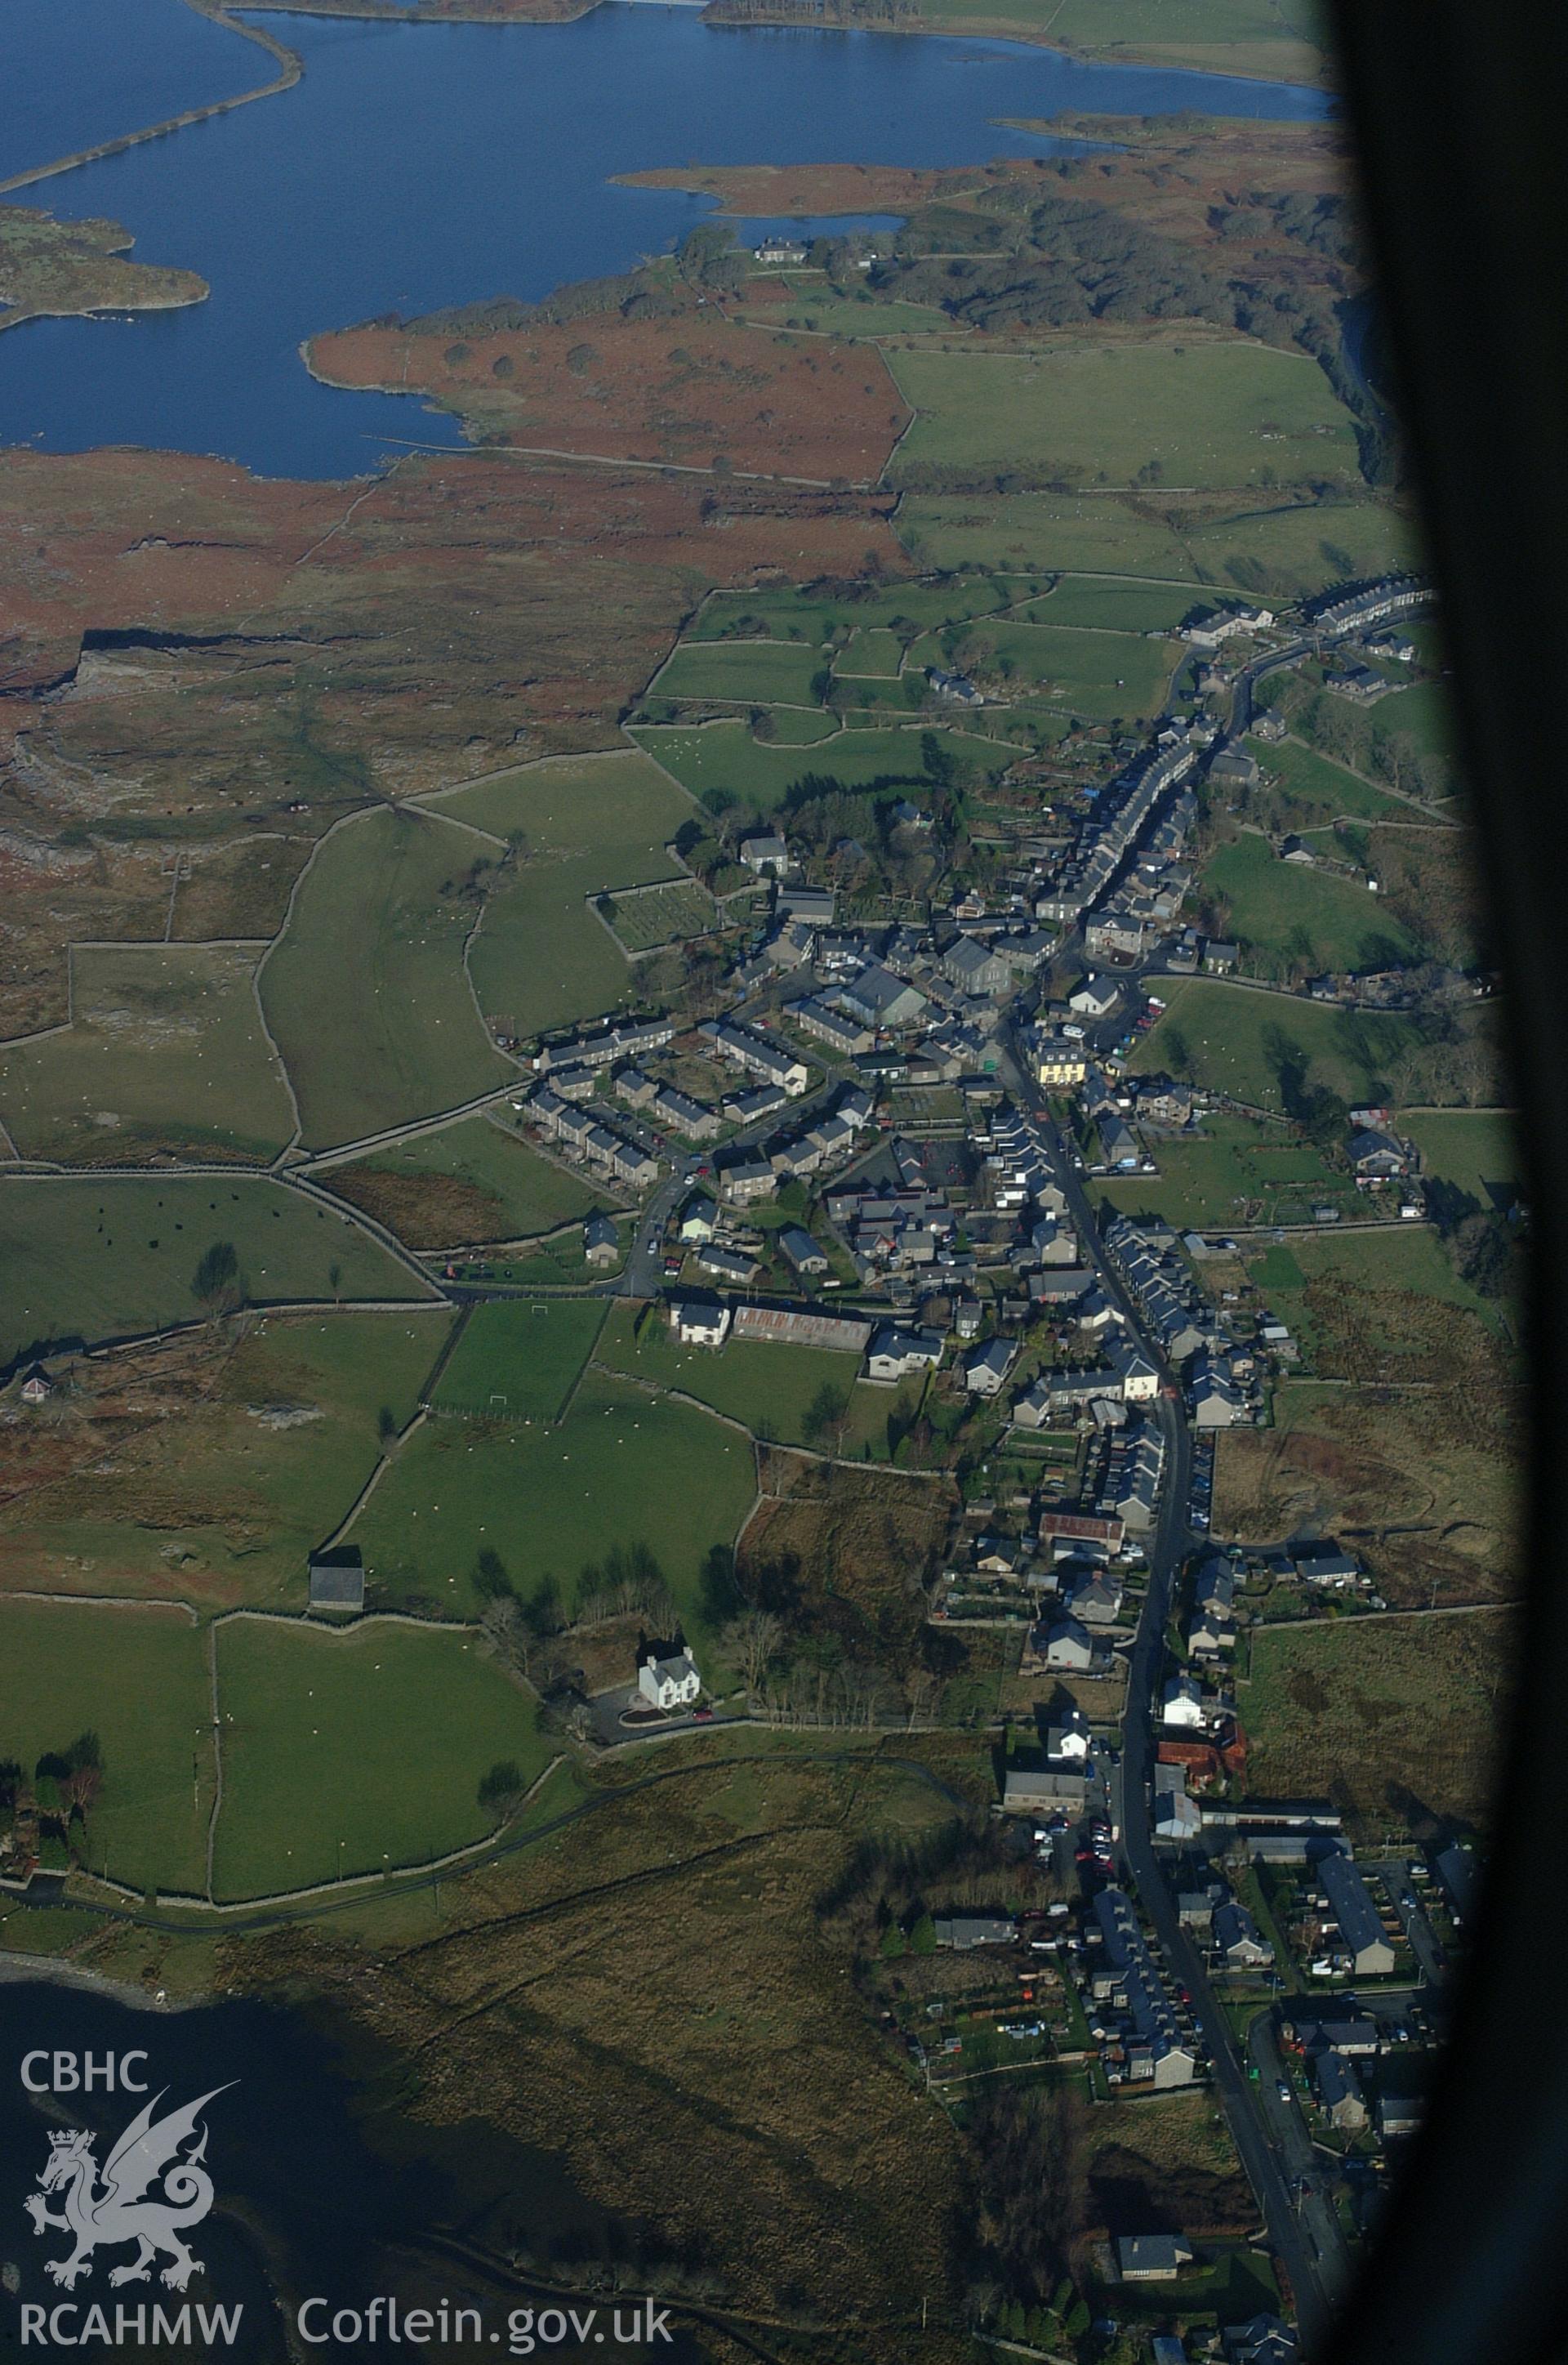 RCAHMW colour oblique aerial photograph of Trawsfynydd taken on 24/01/2005 by Toby Driver